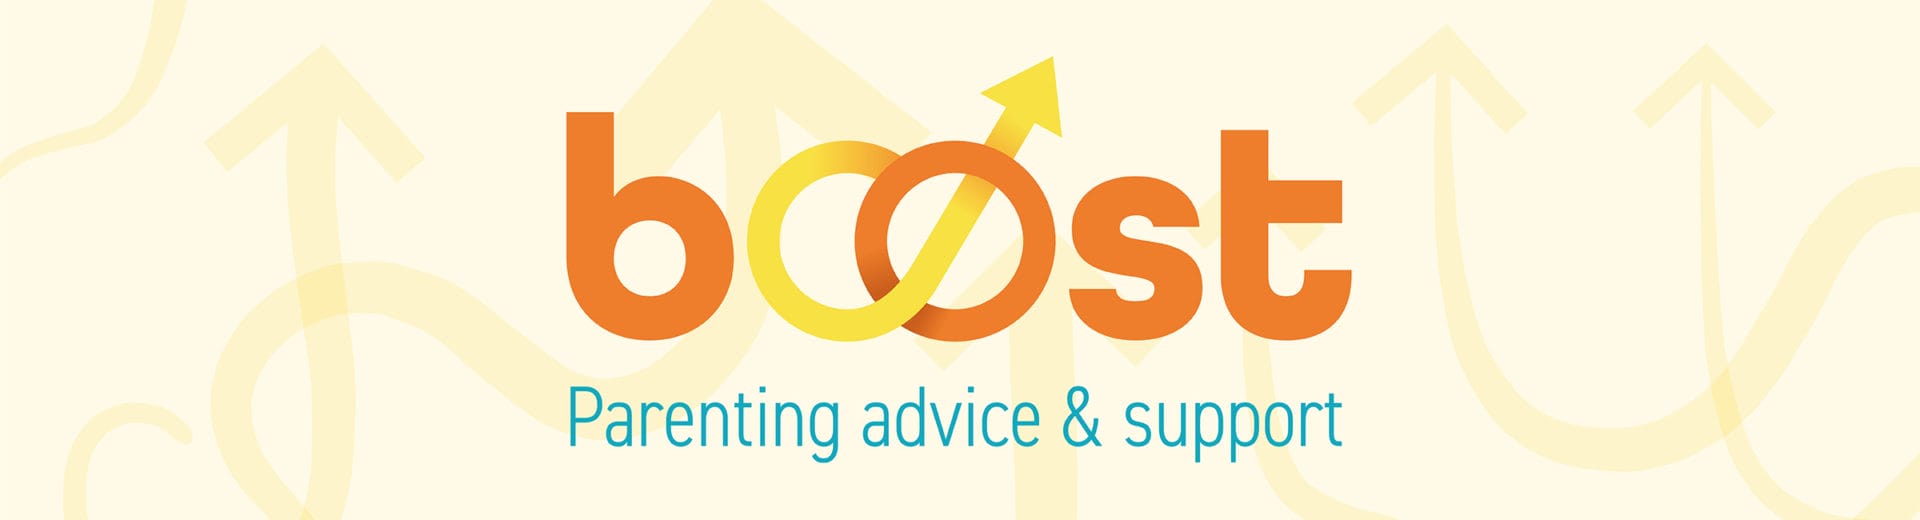 Boost Parenting advice and support